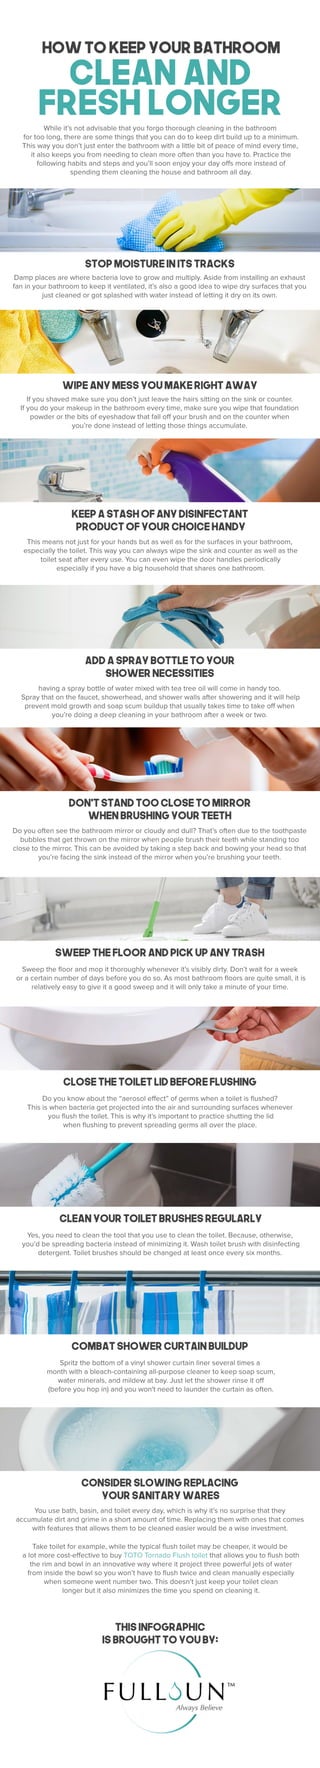 How To Keep Your Bathroom Clean And Fresh Longer